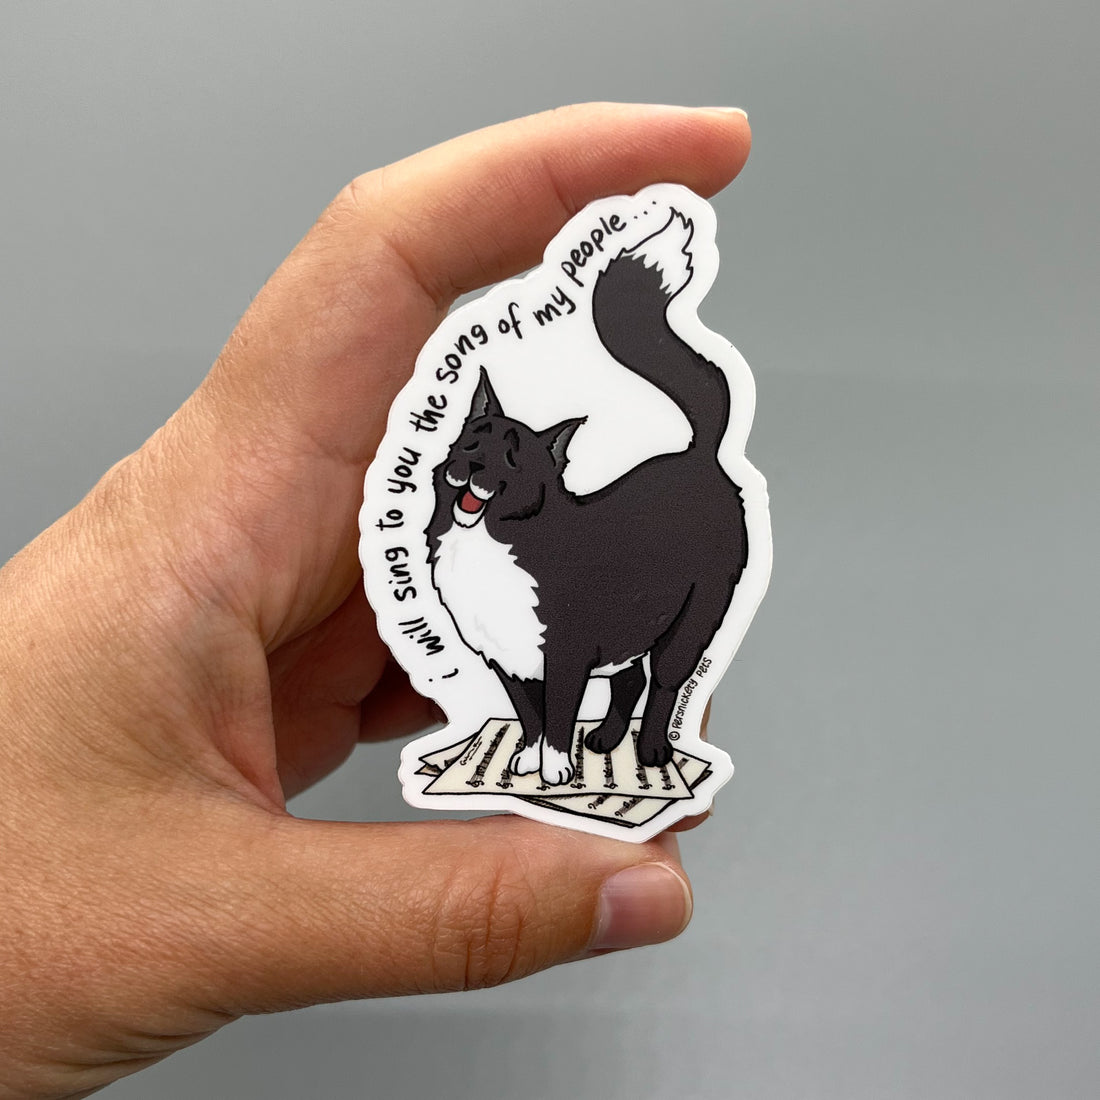 Persnickety Pets: Giovanni vinyl sticker in hand